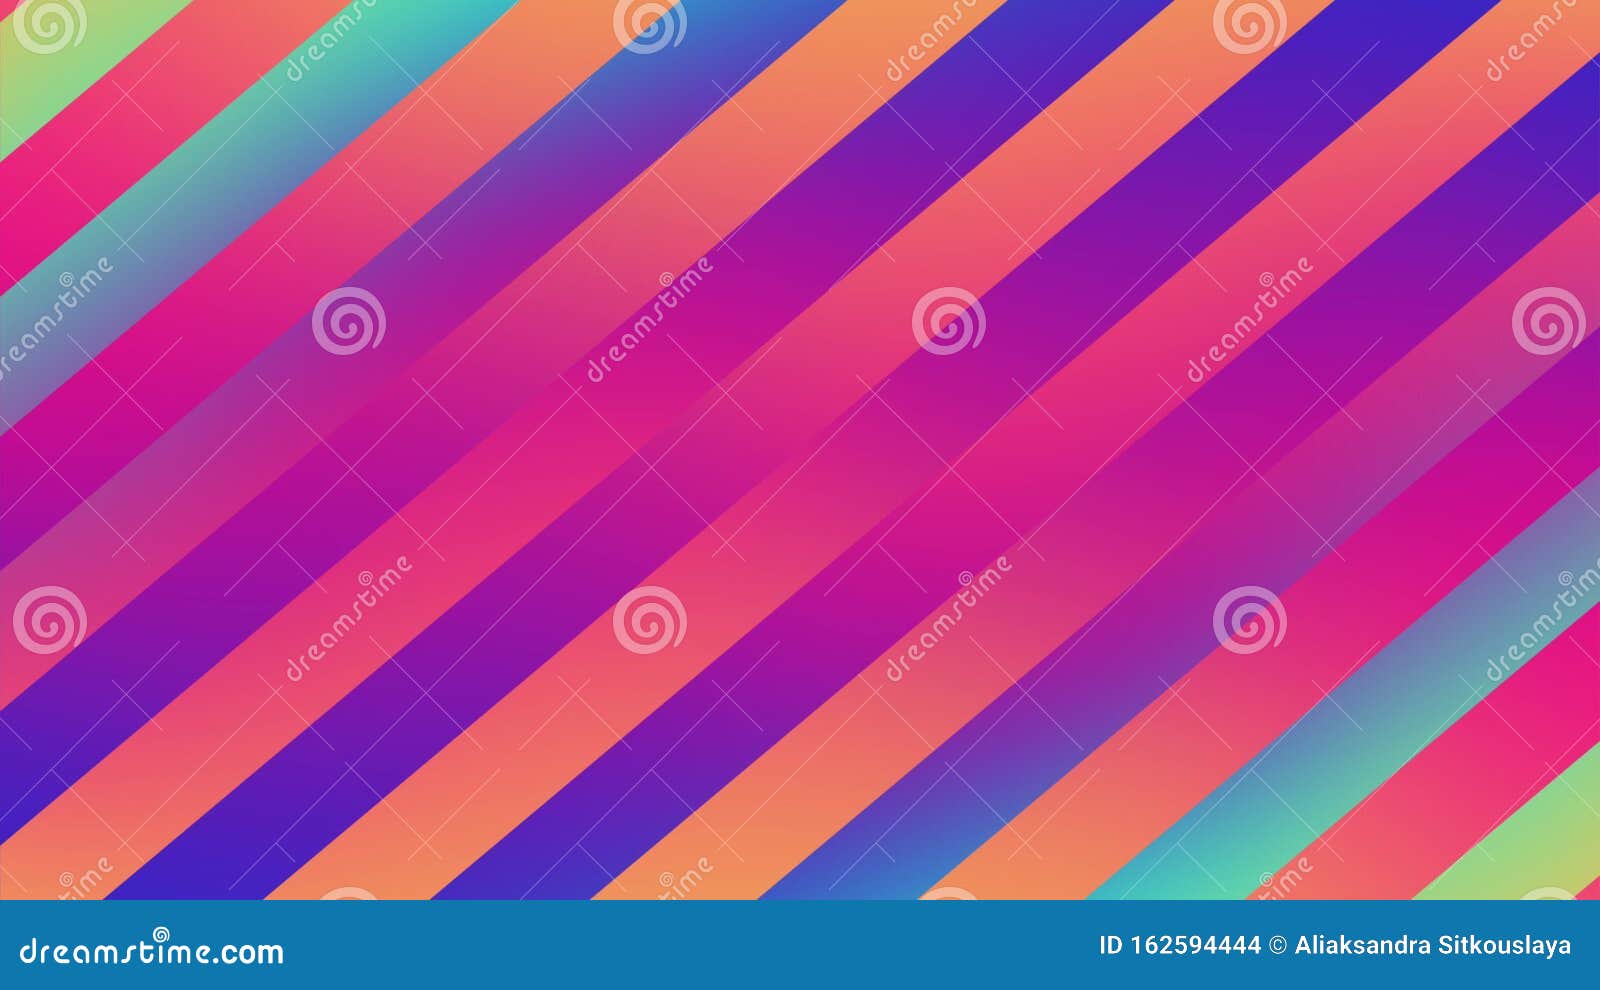 Audio Visual Seamless Loop 3D Animation of Color Light for Your Video  Presentation Backgrounds, Concert Visual Identity Stock Illustration -  Illustration of branding, circle: 162594444